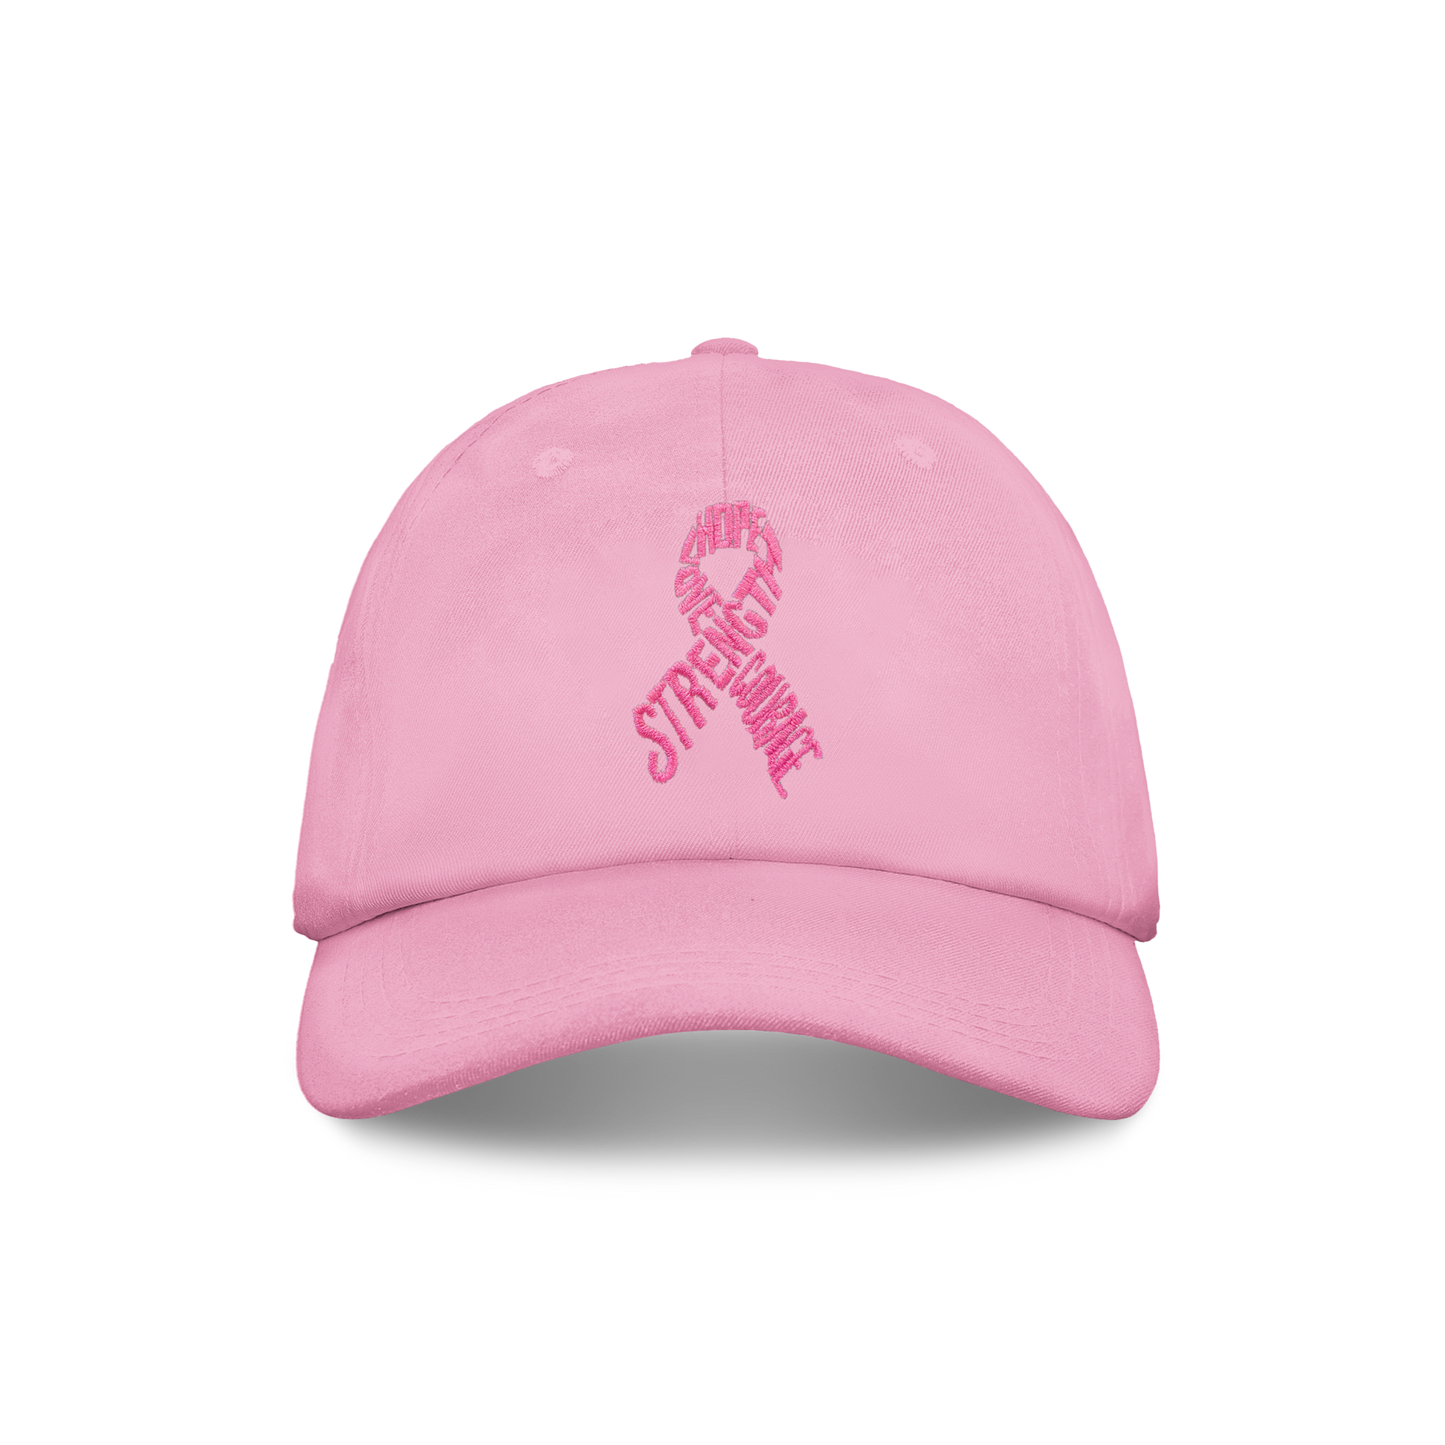 The Limited Edition Strength Dad Hat - Pink